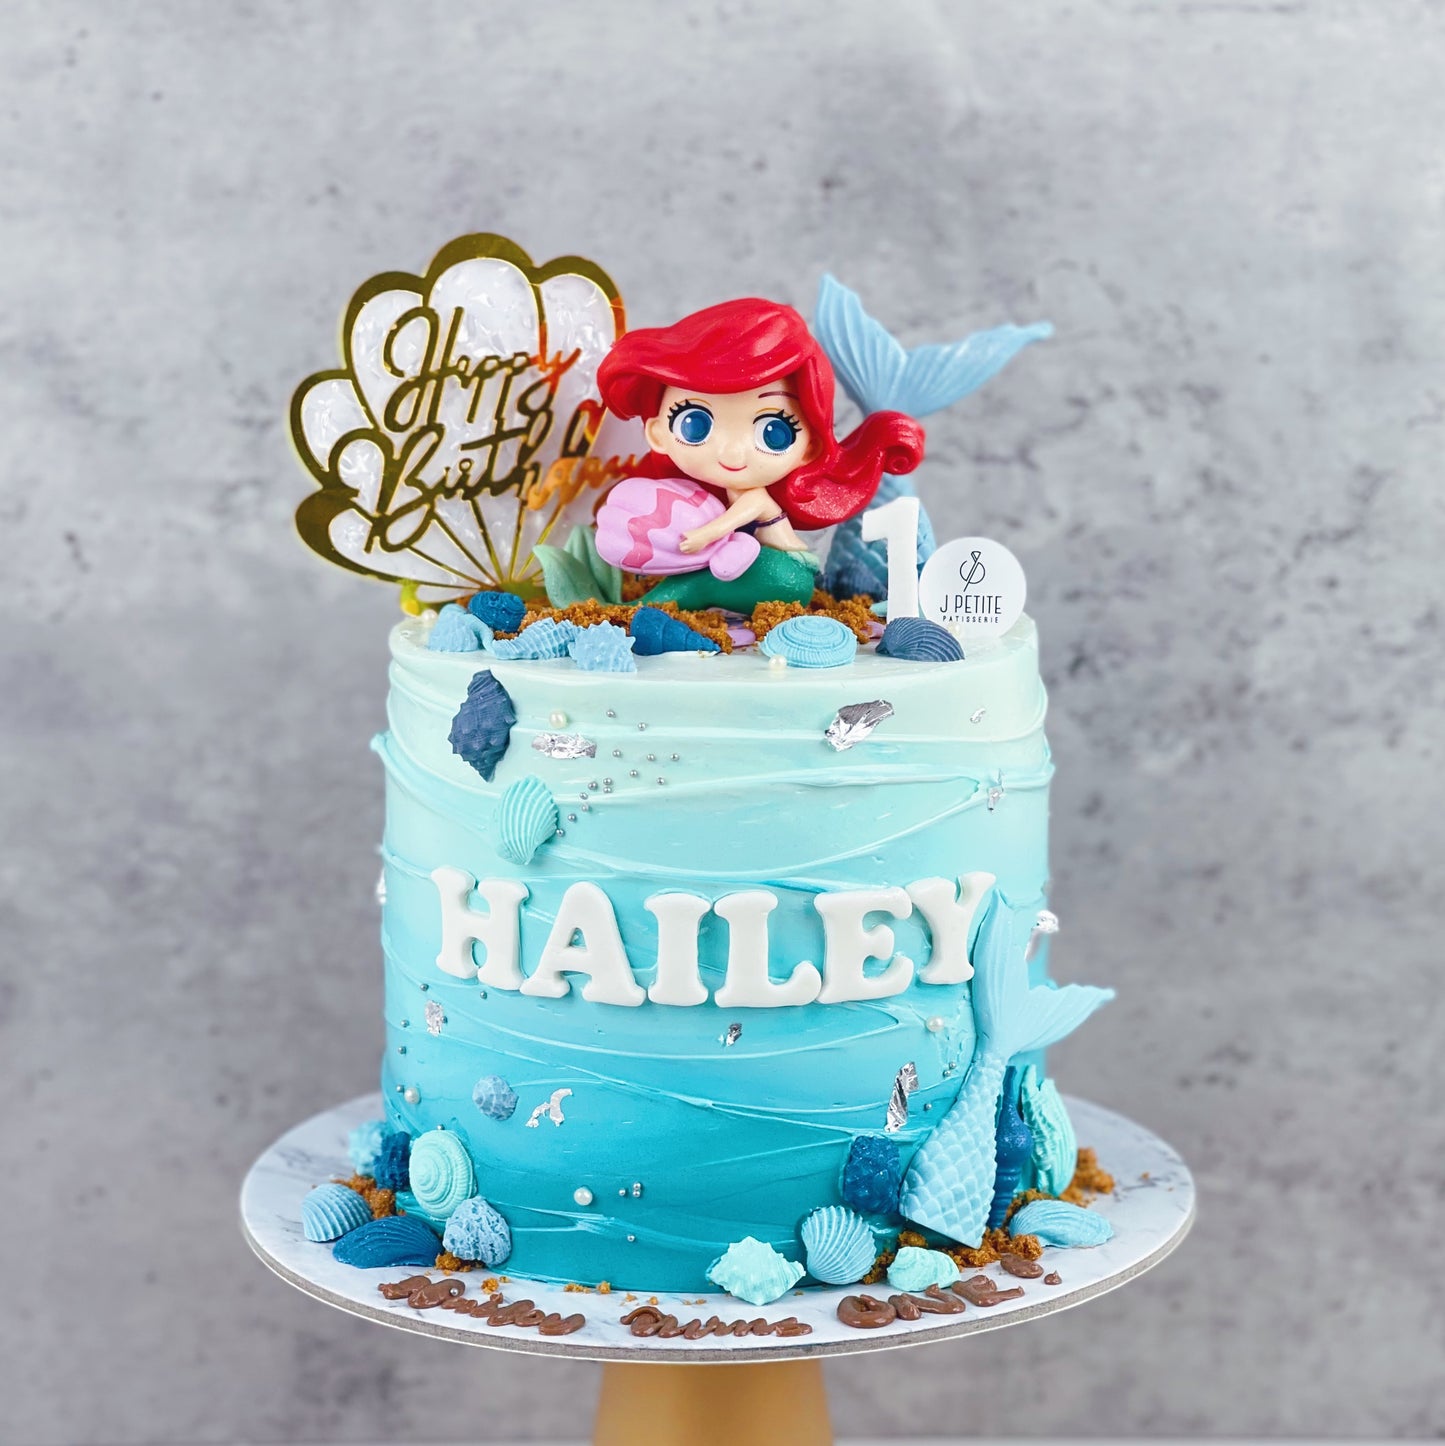 The Little Mermaid Toy Cake